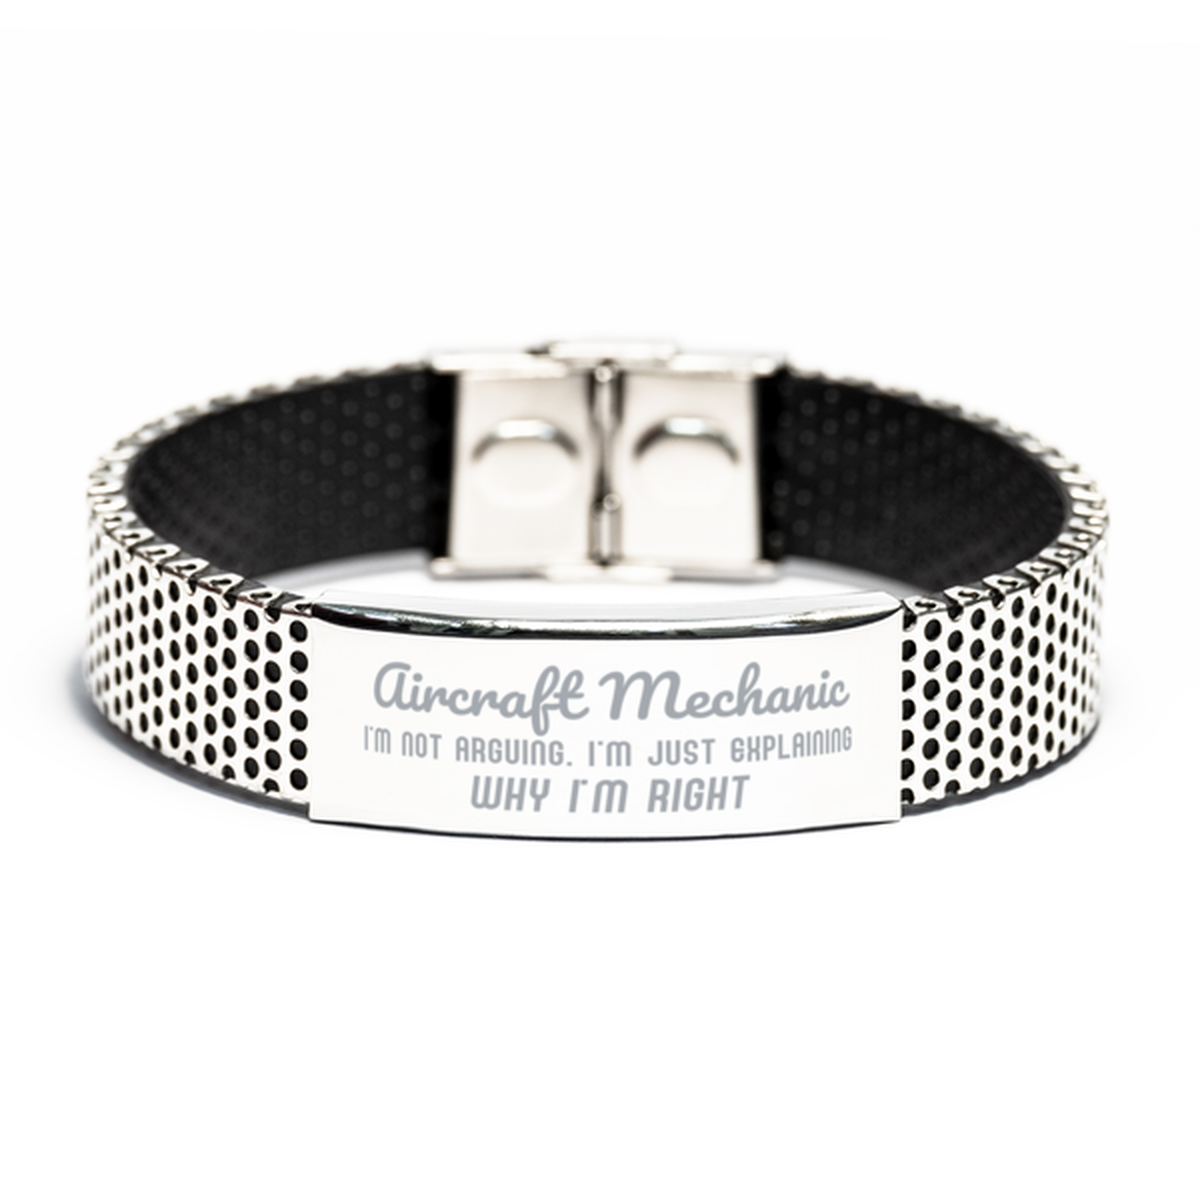 Aircraft Mechanic I'm not Arguing. I'm Just Explaining Why I'm RIGHT Stainless Steel Bracelet, Funny Saying Quote Aircraft Mechanic Gifts For Aircraft Mechanic Graduation Birthday Christmas Gifts for Men Women Coworker